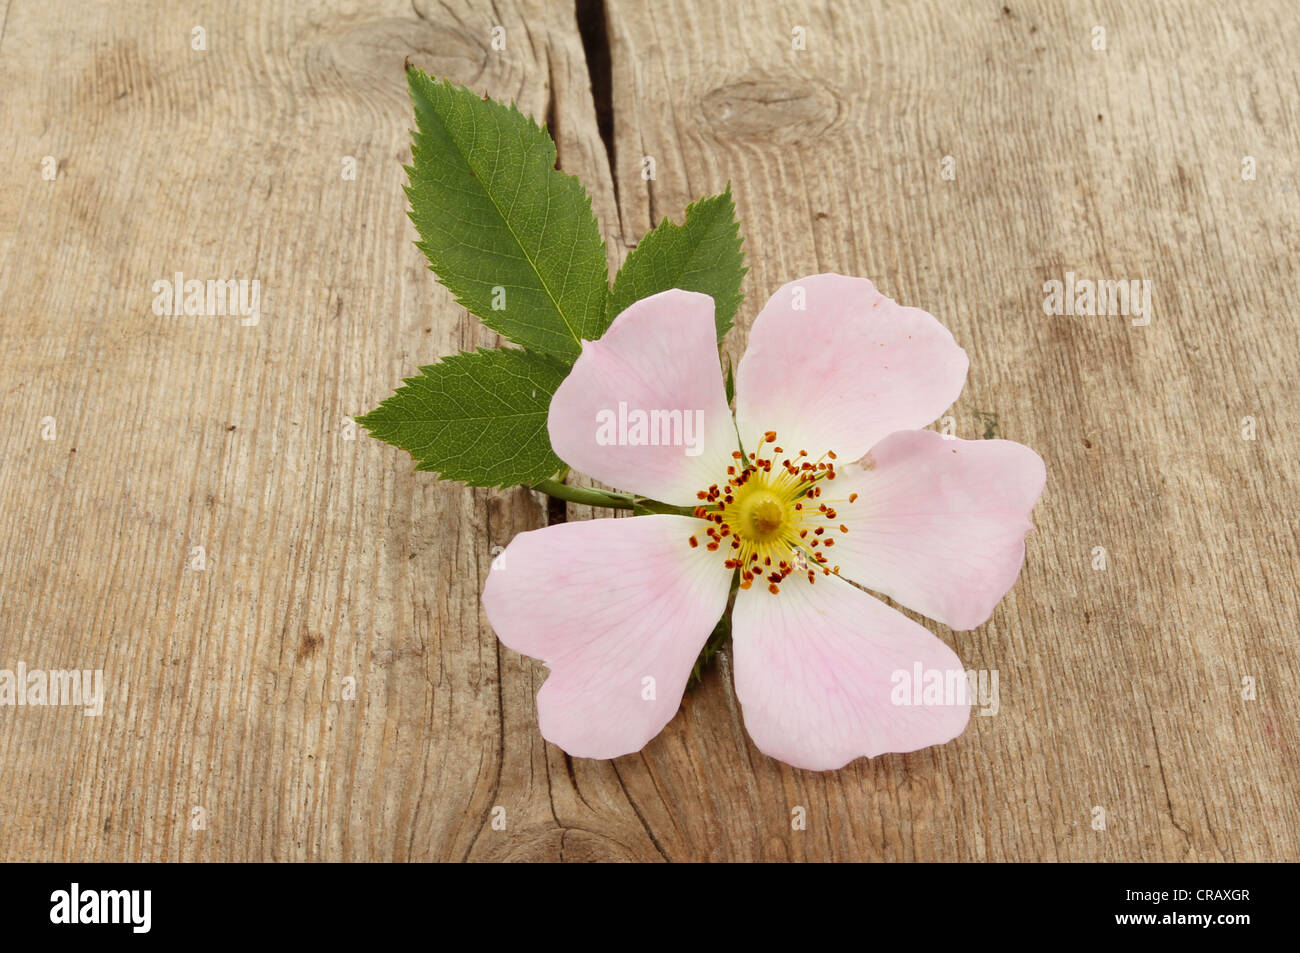 Un sauvage, dog rose sur old Weathered Wood Banque D'Images